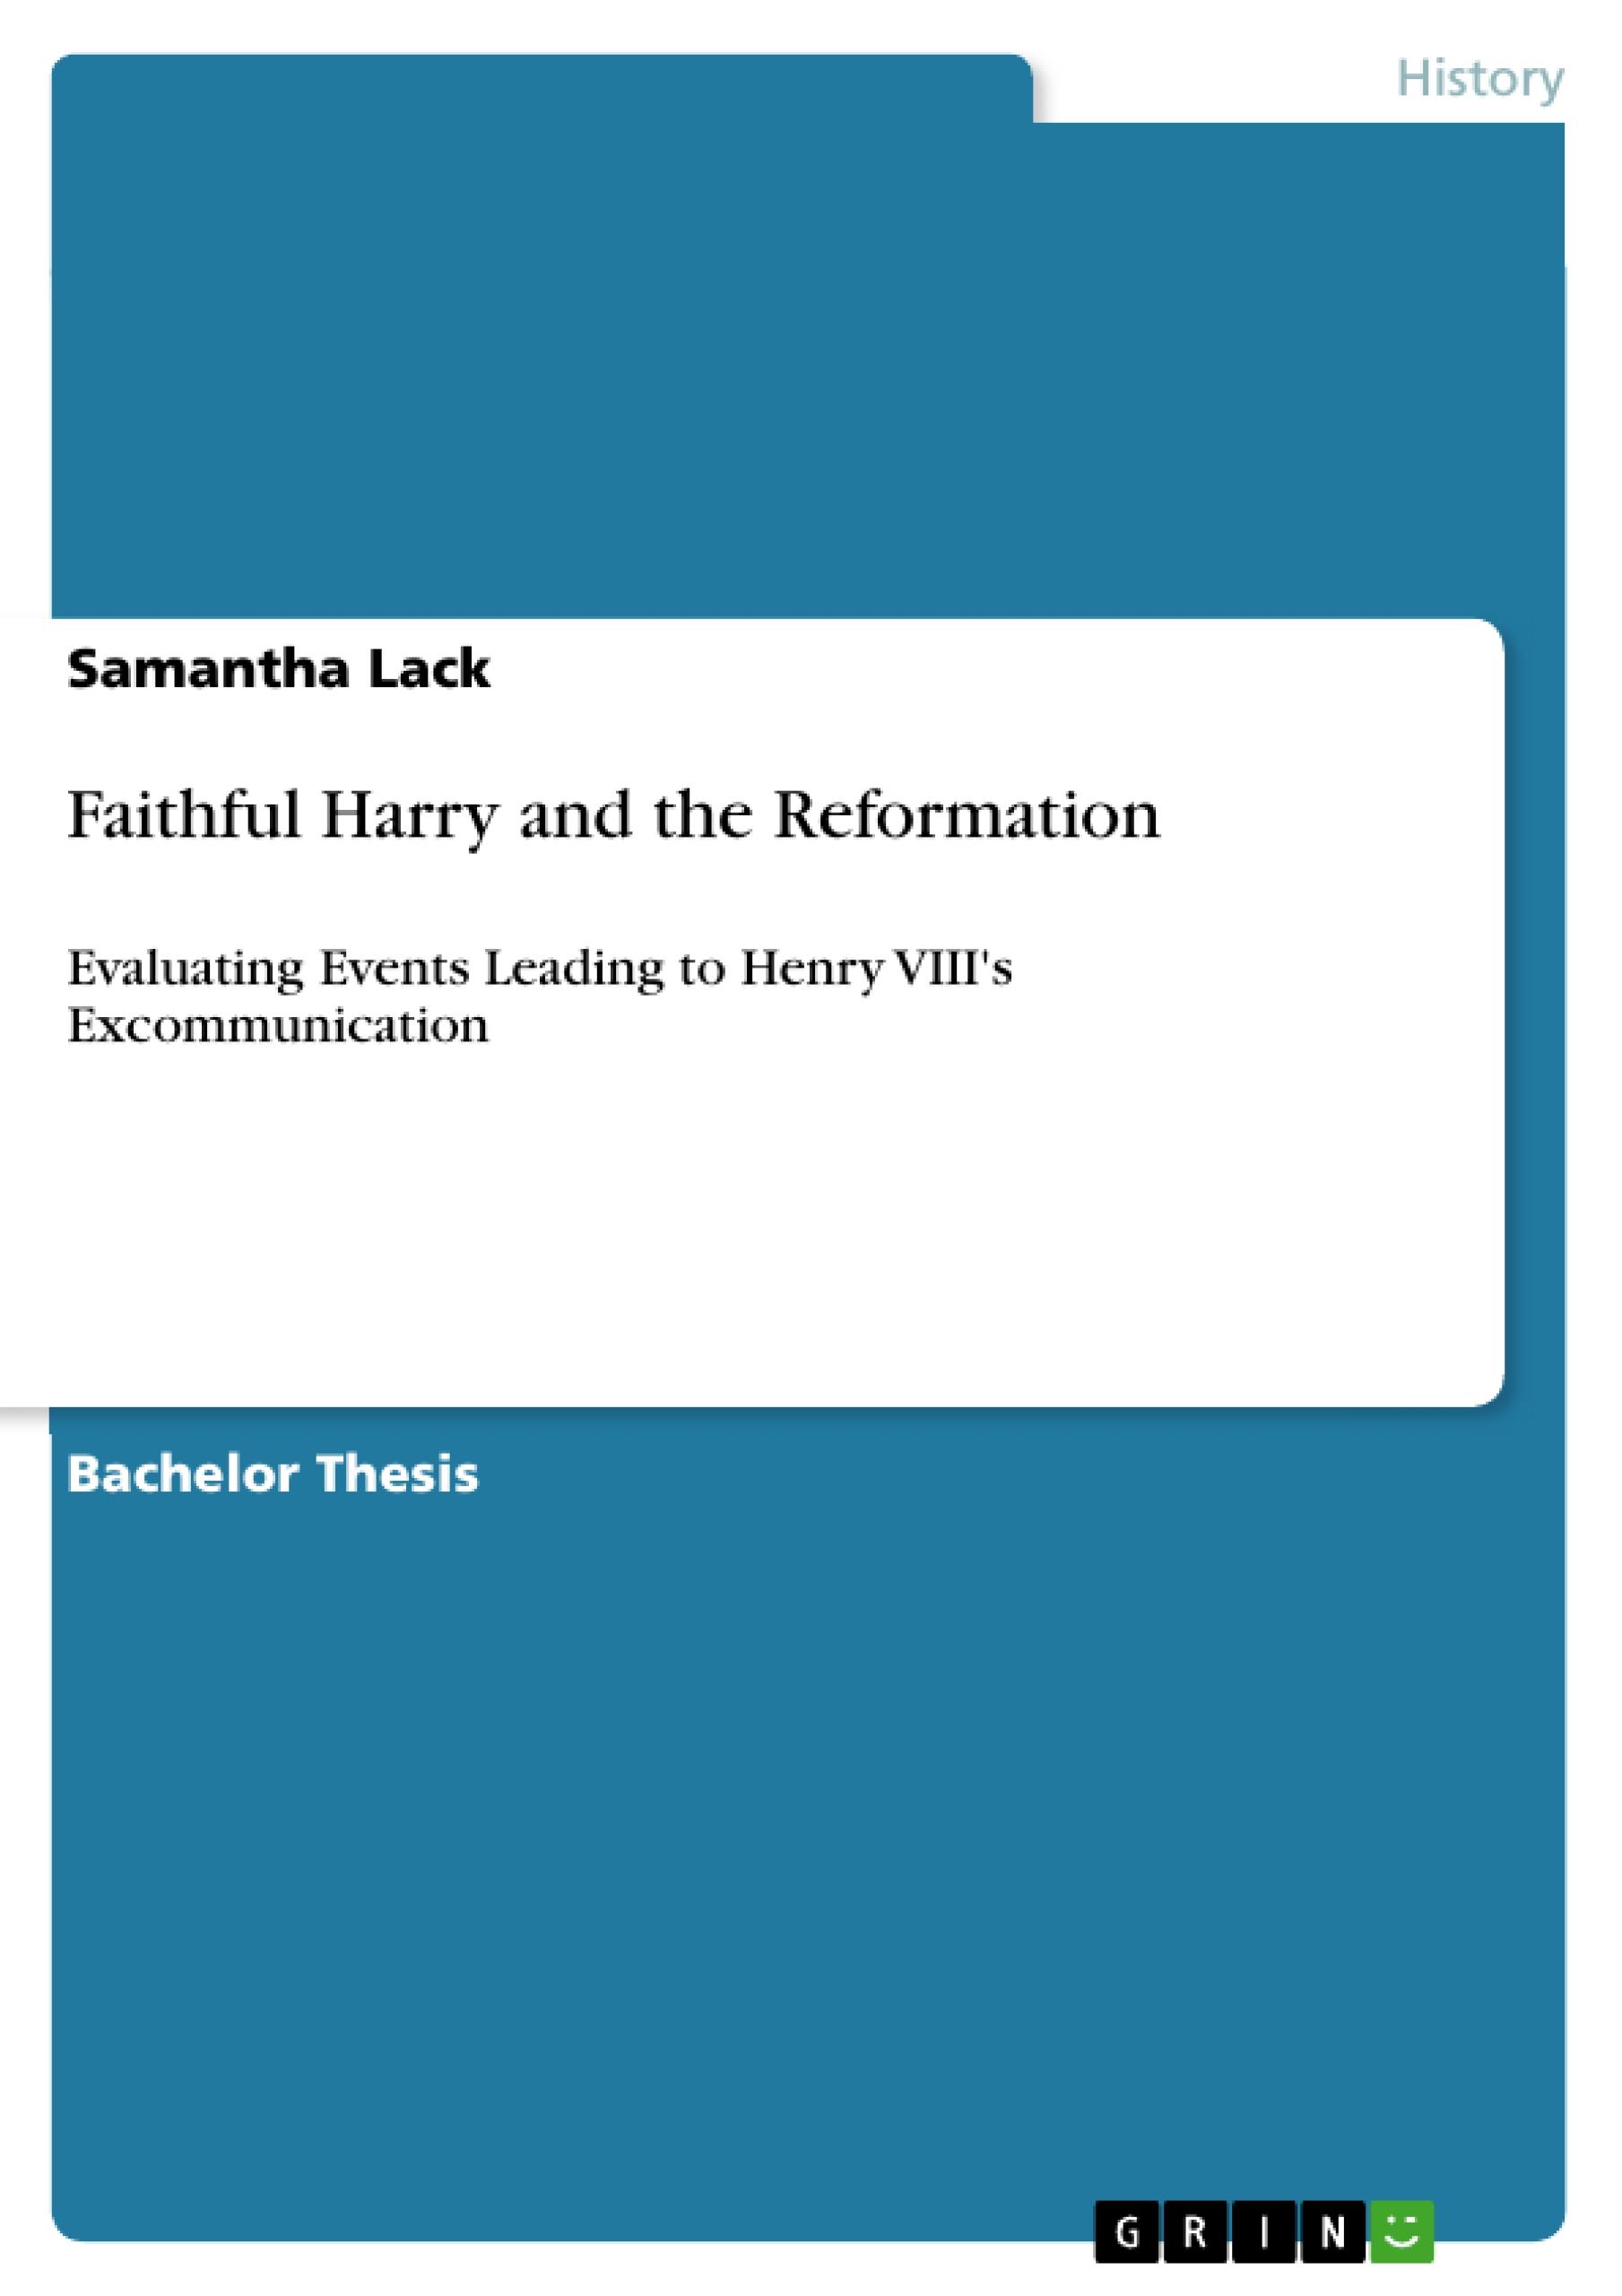 Faithful Harry and the Reformation / Evaluating Events Leading to Henry VIII's Excommunication / Samantha Lack / Taschenbuch / Paperback / 24 S. / Englisch / 2012 / GRIN Verlag / EAN 9783656237457 - Lack, Samantha